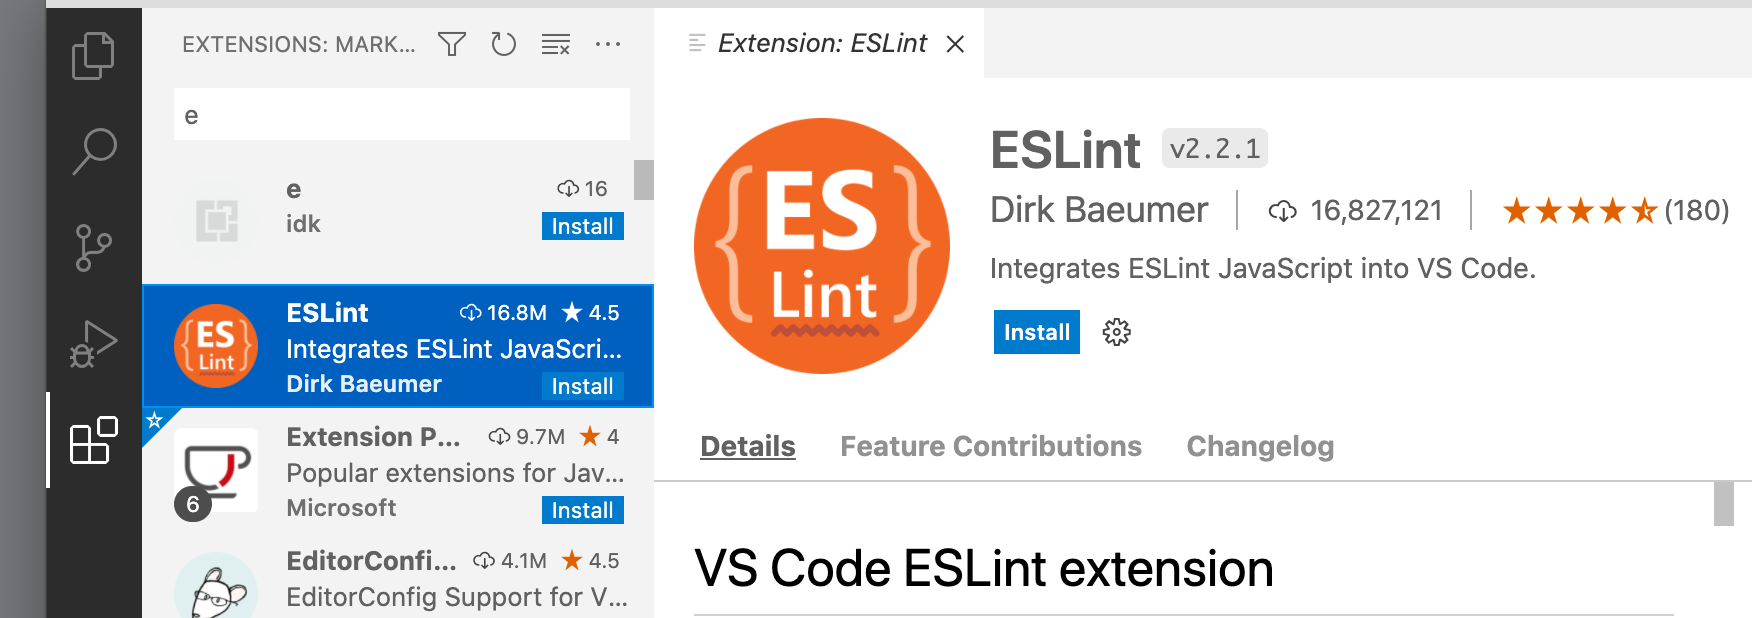 A screenshot showing the ESLint extension in Visual Studio Code